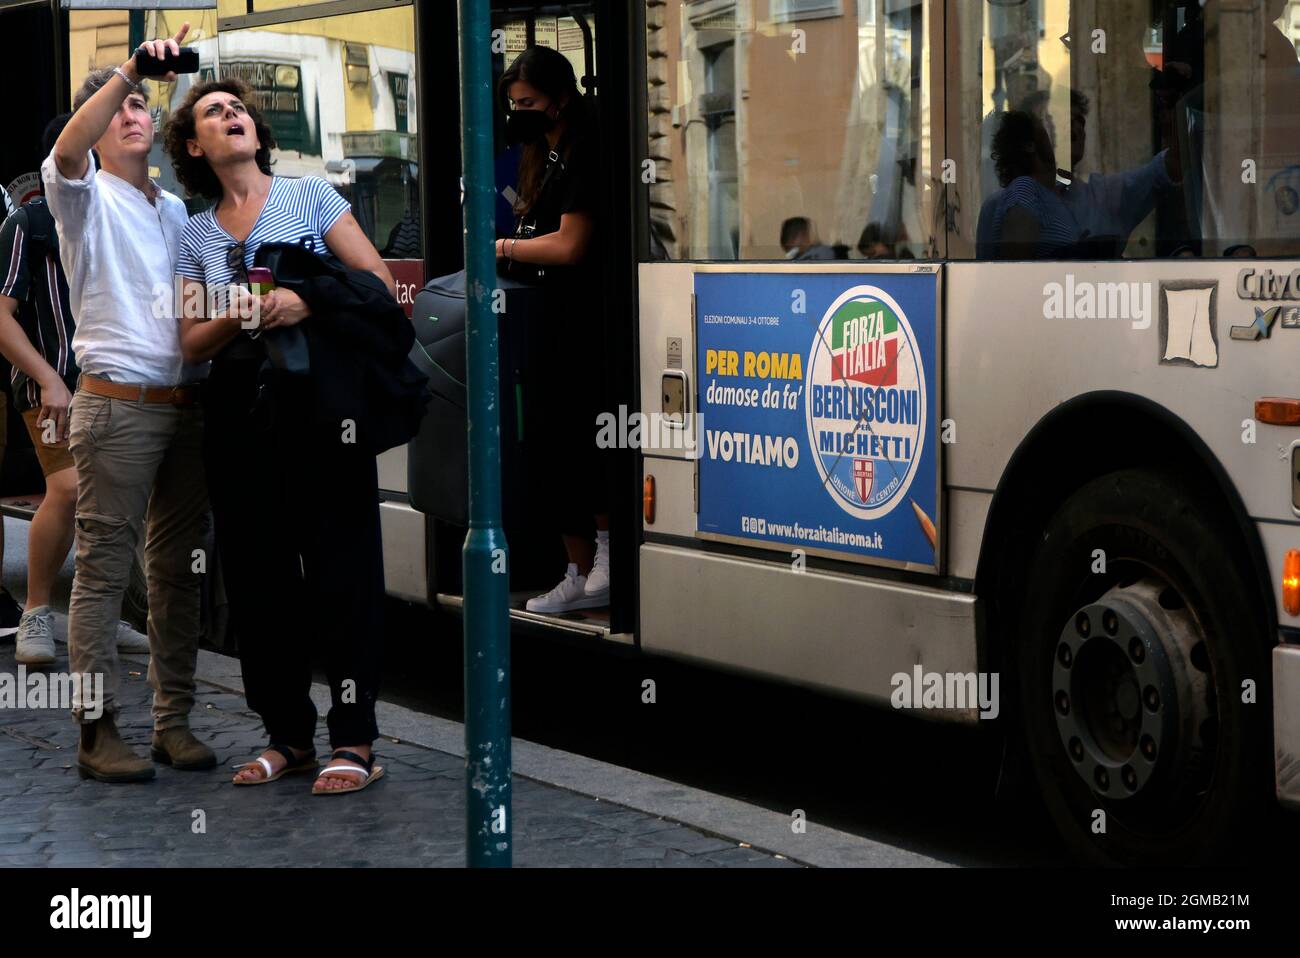 Rome, Italy. 17th Sep, 2021. The Forza Italia party election cartel, in support of Rome's center-right candidate for mayor Enrico Michetti, is displayed on a bus.The elections will be held on October 3rd and 4th, 2021, with all 22 candidates for mayors. The main candidates are four, Enrico Michetti, the center-right candidate, Roberto Gualtieri, the center-left candidate, Virginia Raggi, the outgoing mayor and candidate of the 5 Star Movement, and Carlo Calenda, former minister and leader of the Action party. (Photo by Vincenzo Nuzzolese/SOPA Images/Sipa USA) Credit: Sipa USA/Alamy Live News Stock Photo